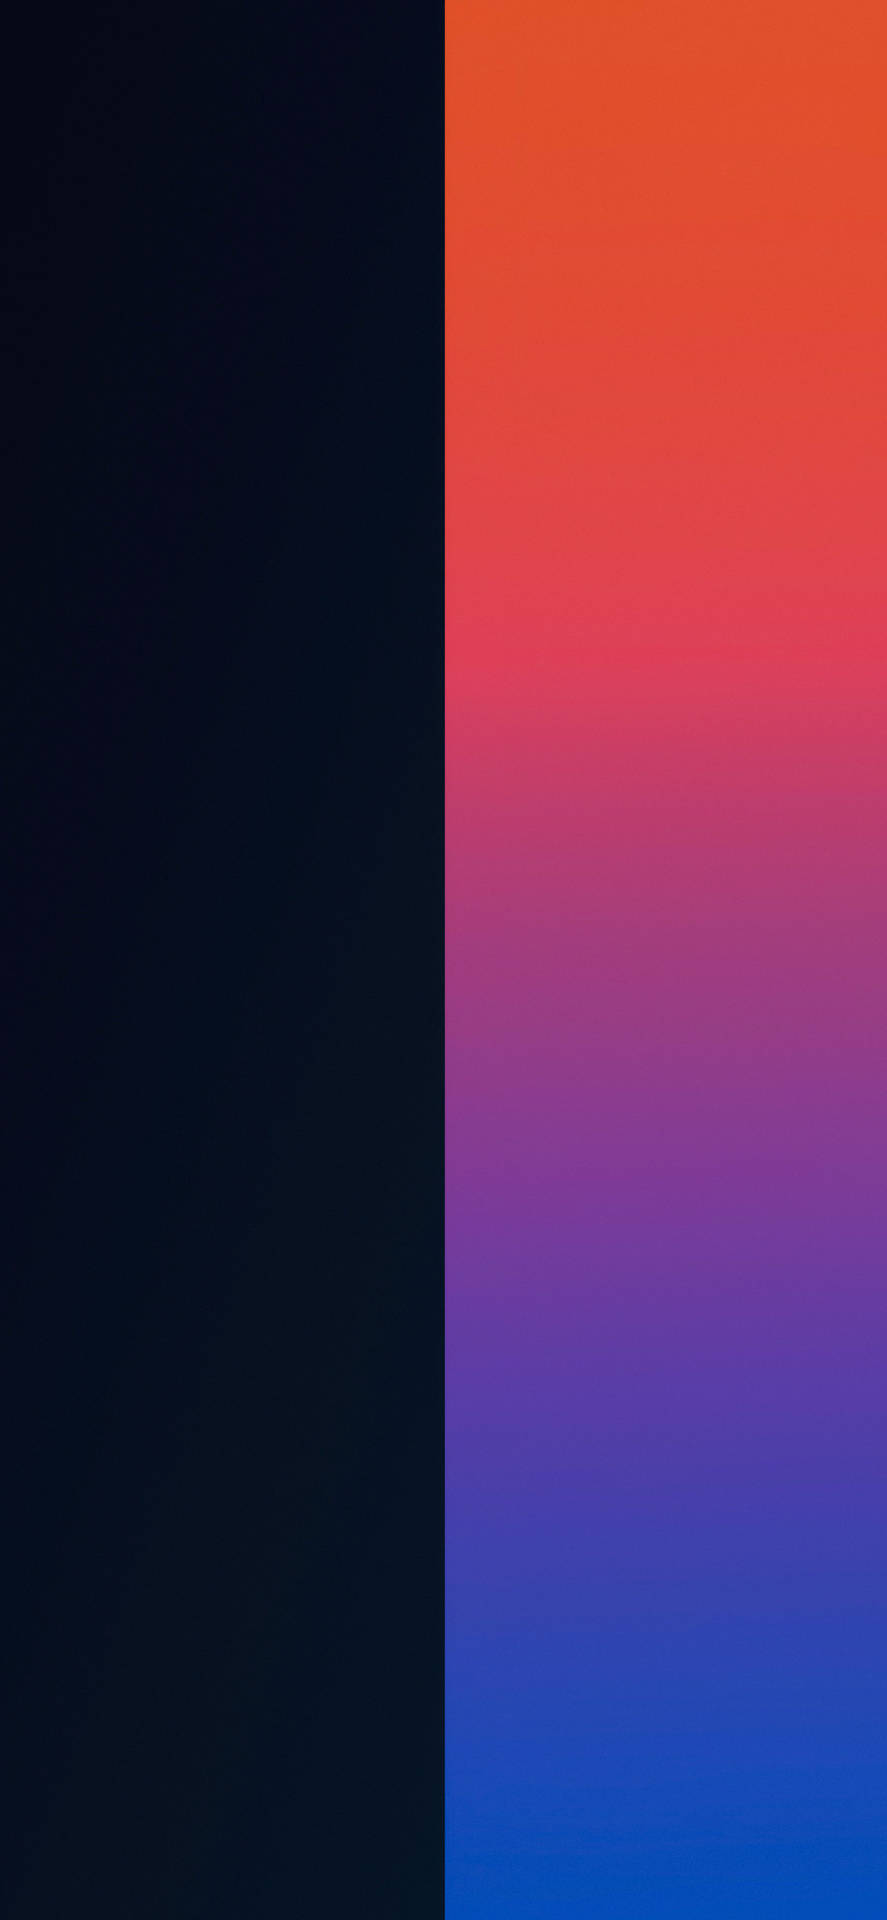 A Split Of Black And Rainbow Colors Wallpaper